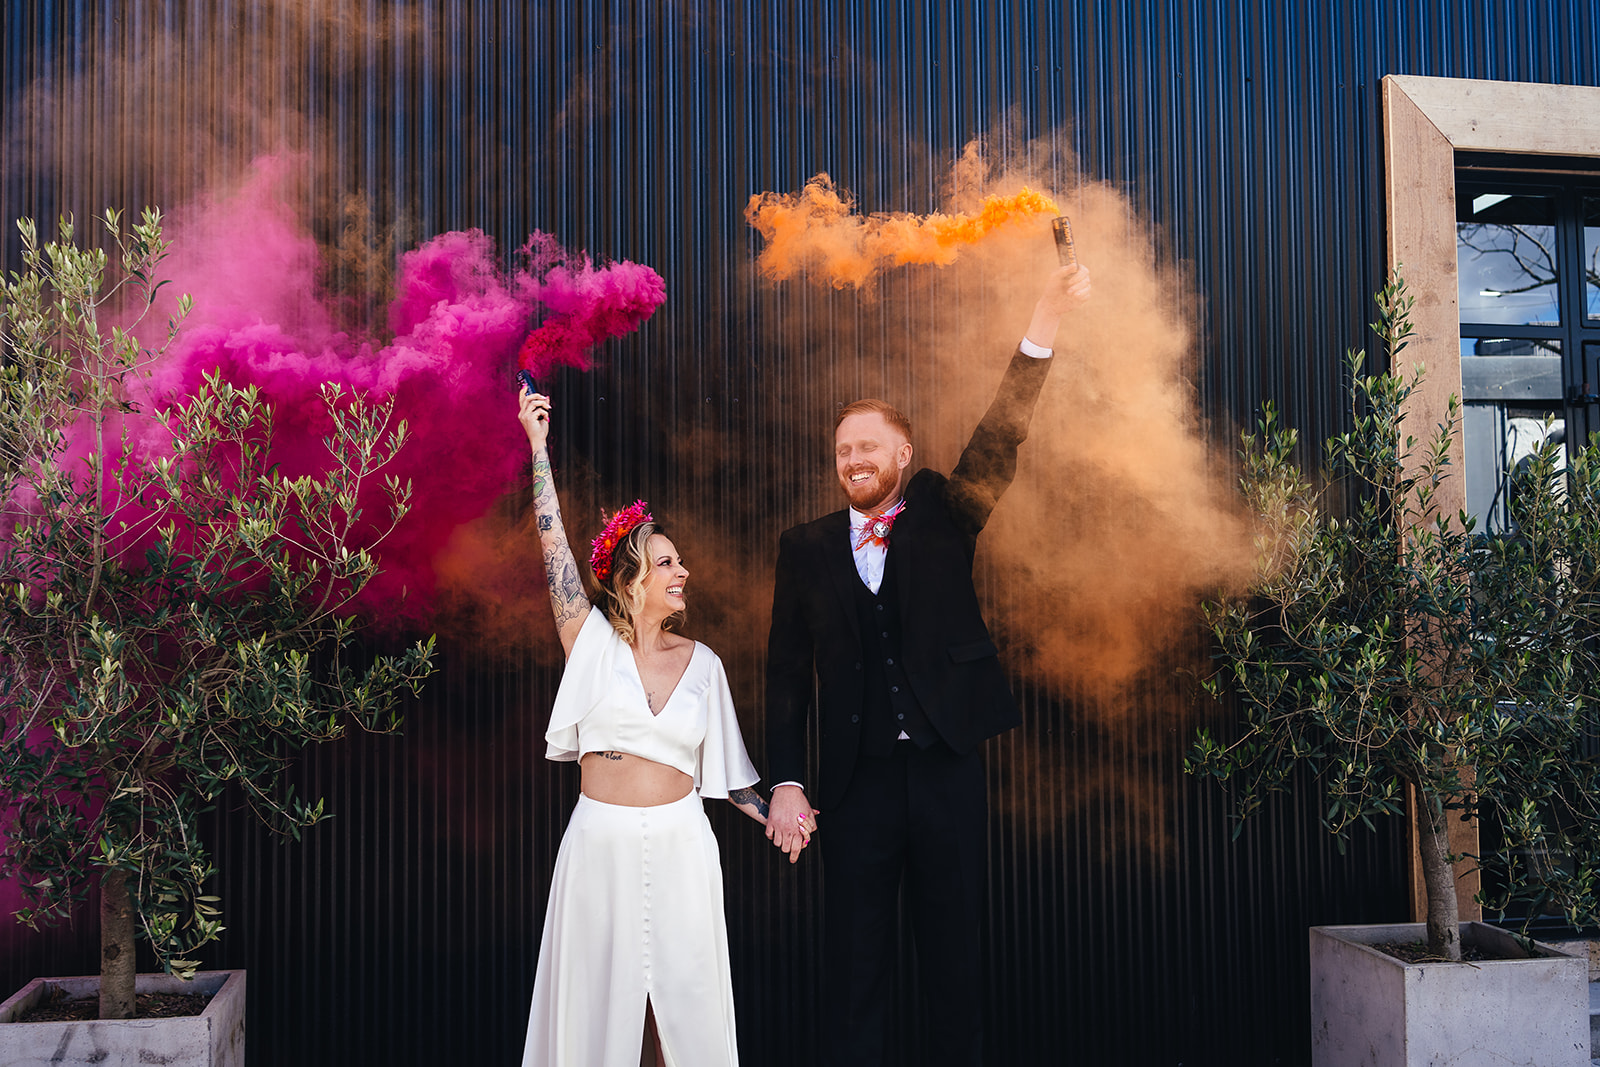 bride and groom holding a smoke bombs in pink and orange - colourful wedding photo ideas